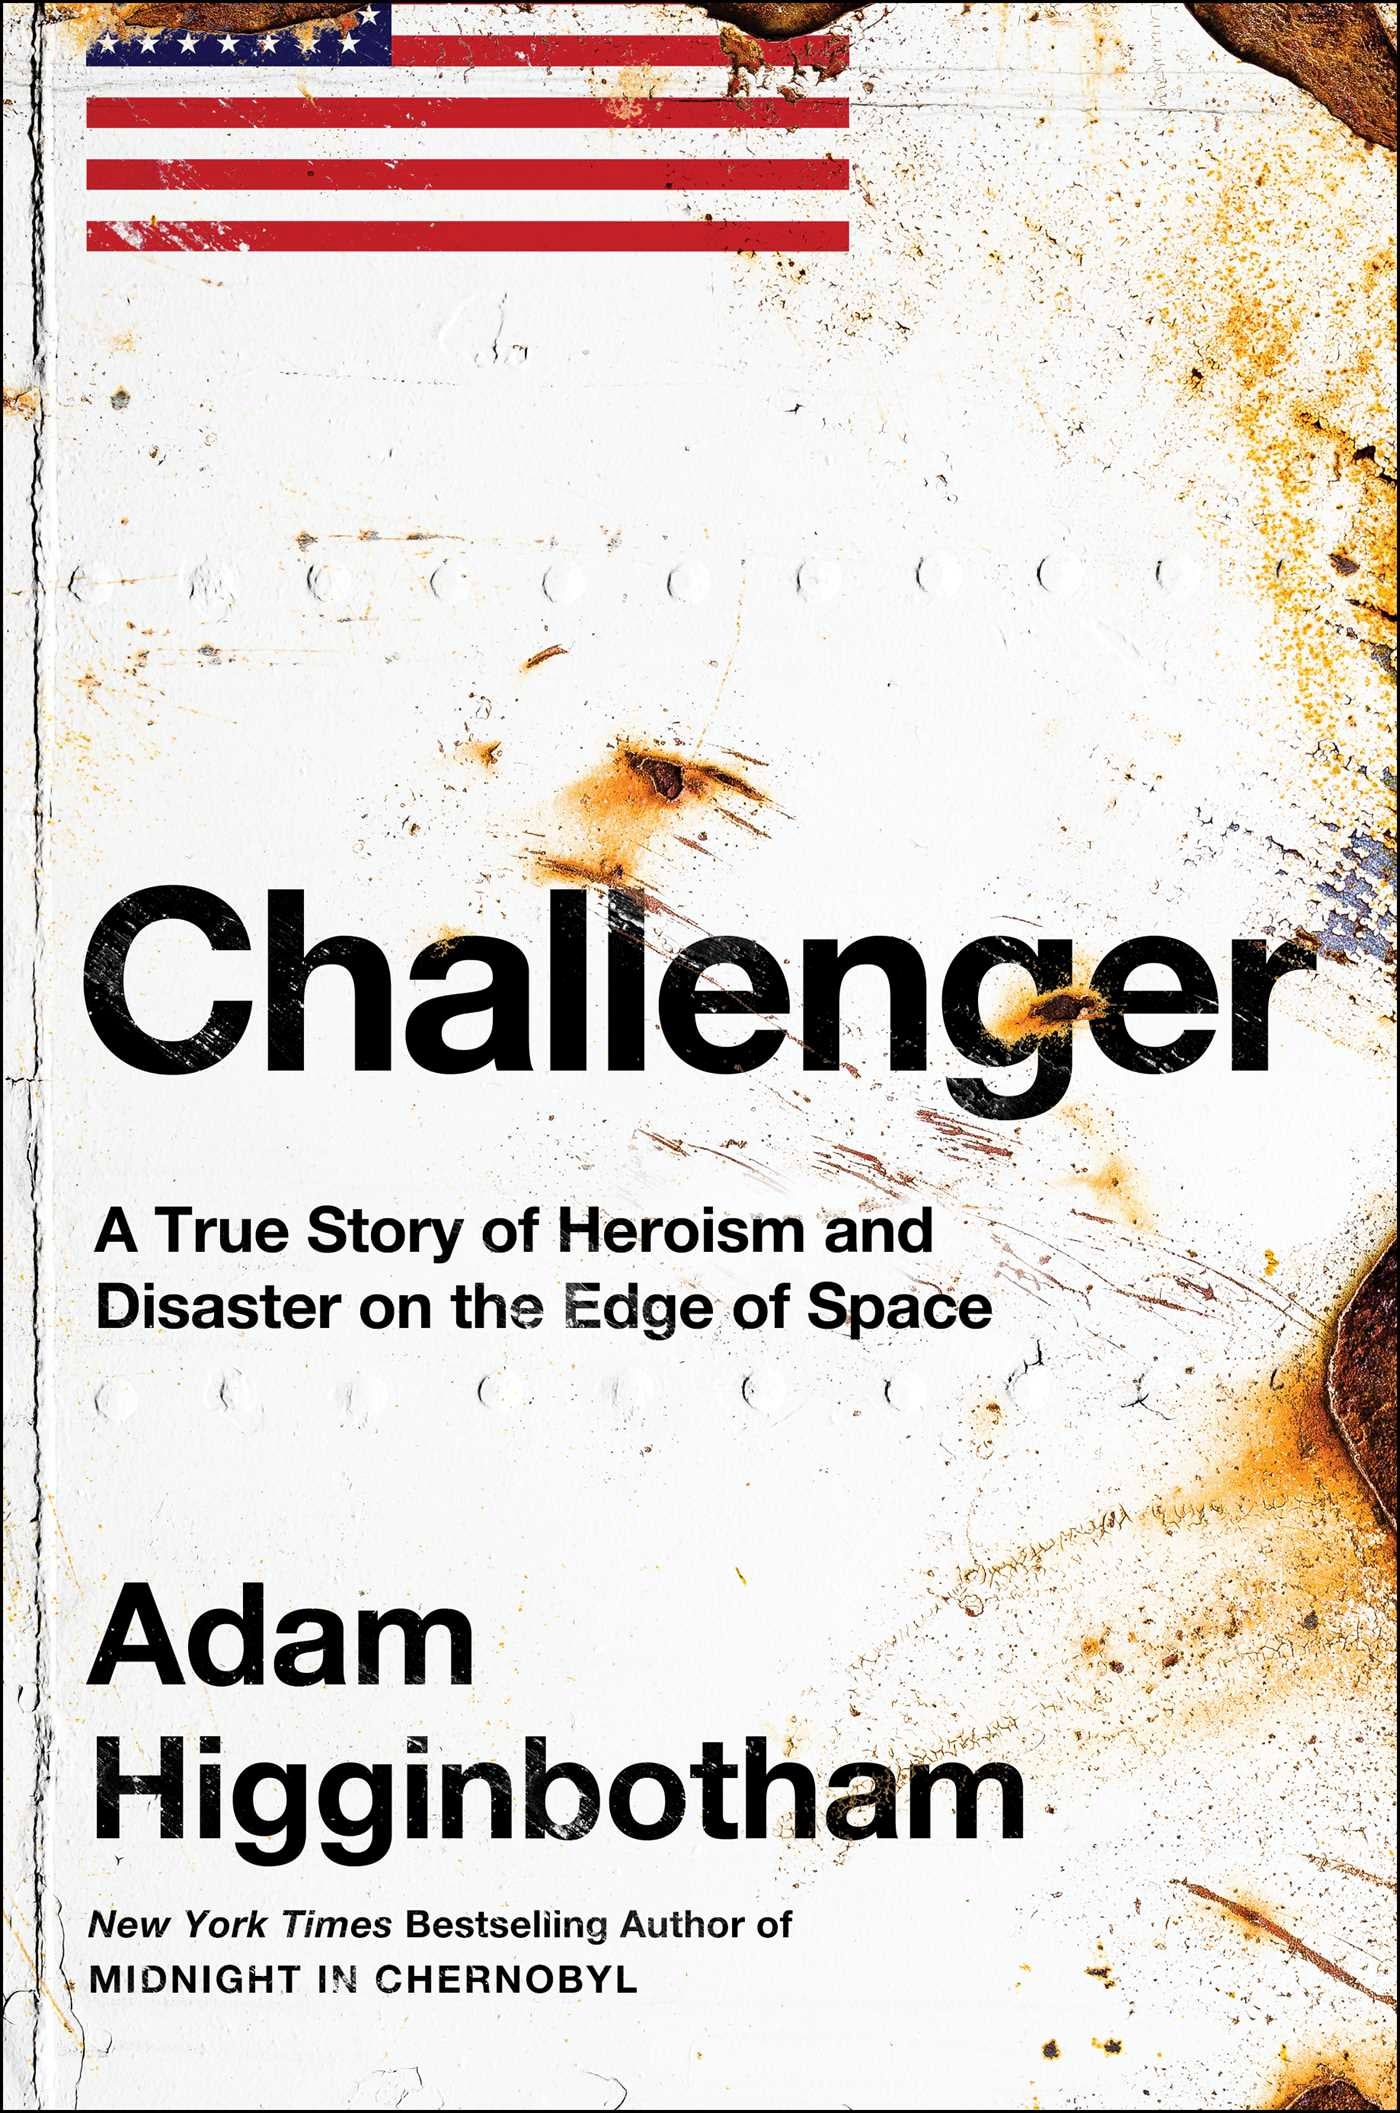 Book Review - Challenger